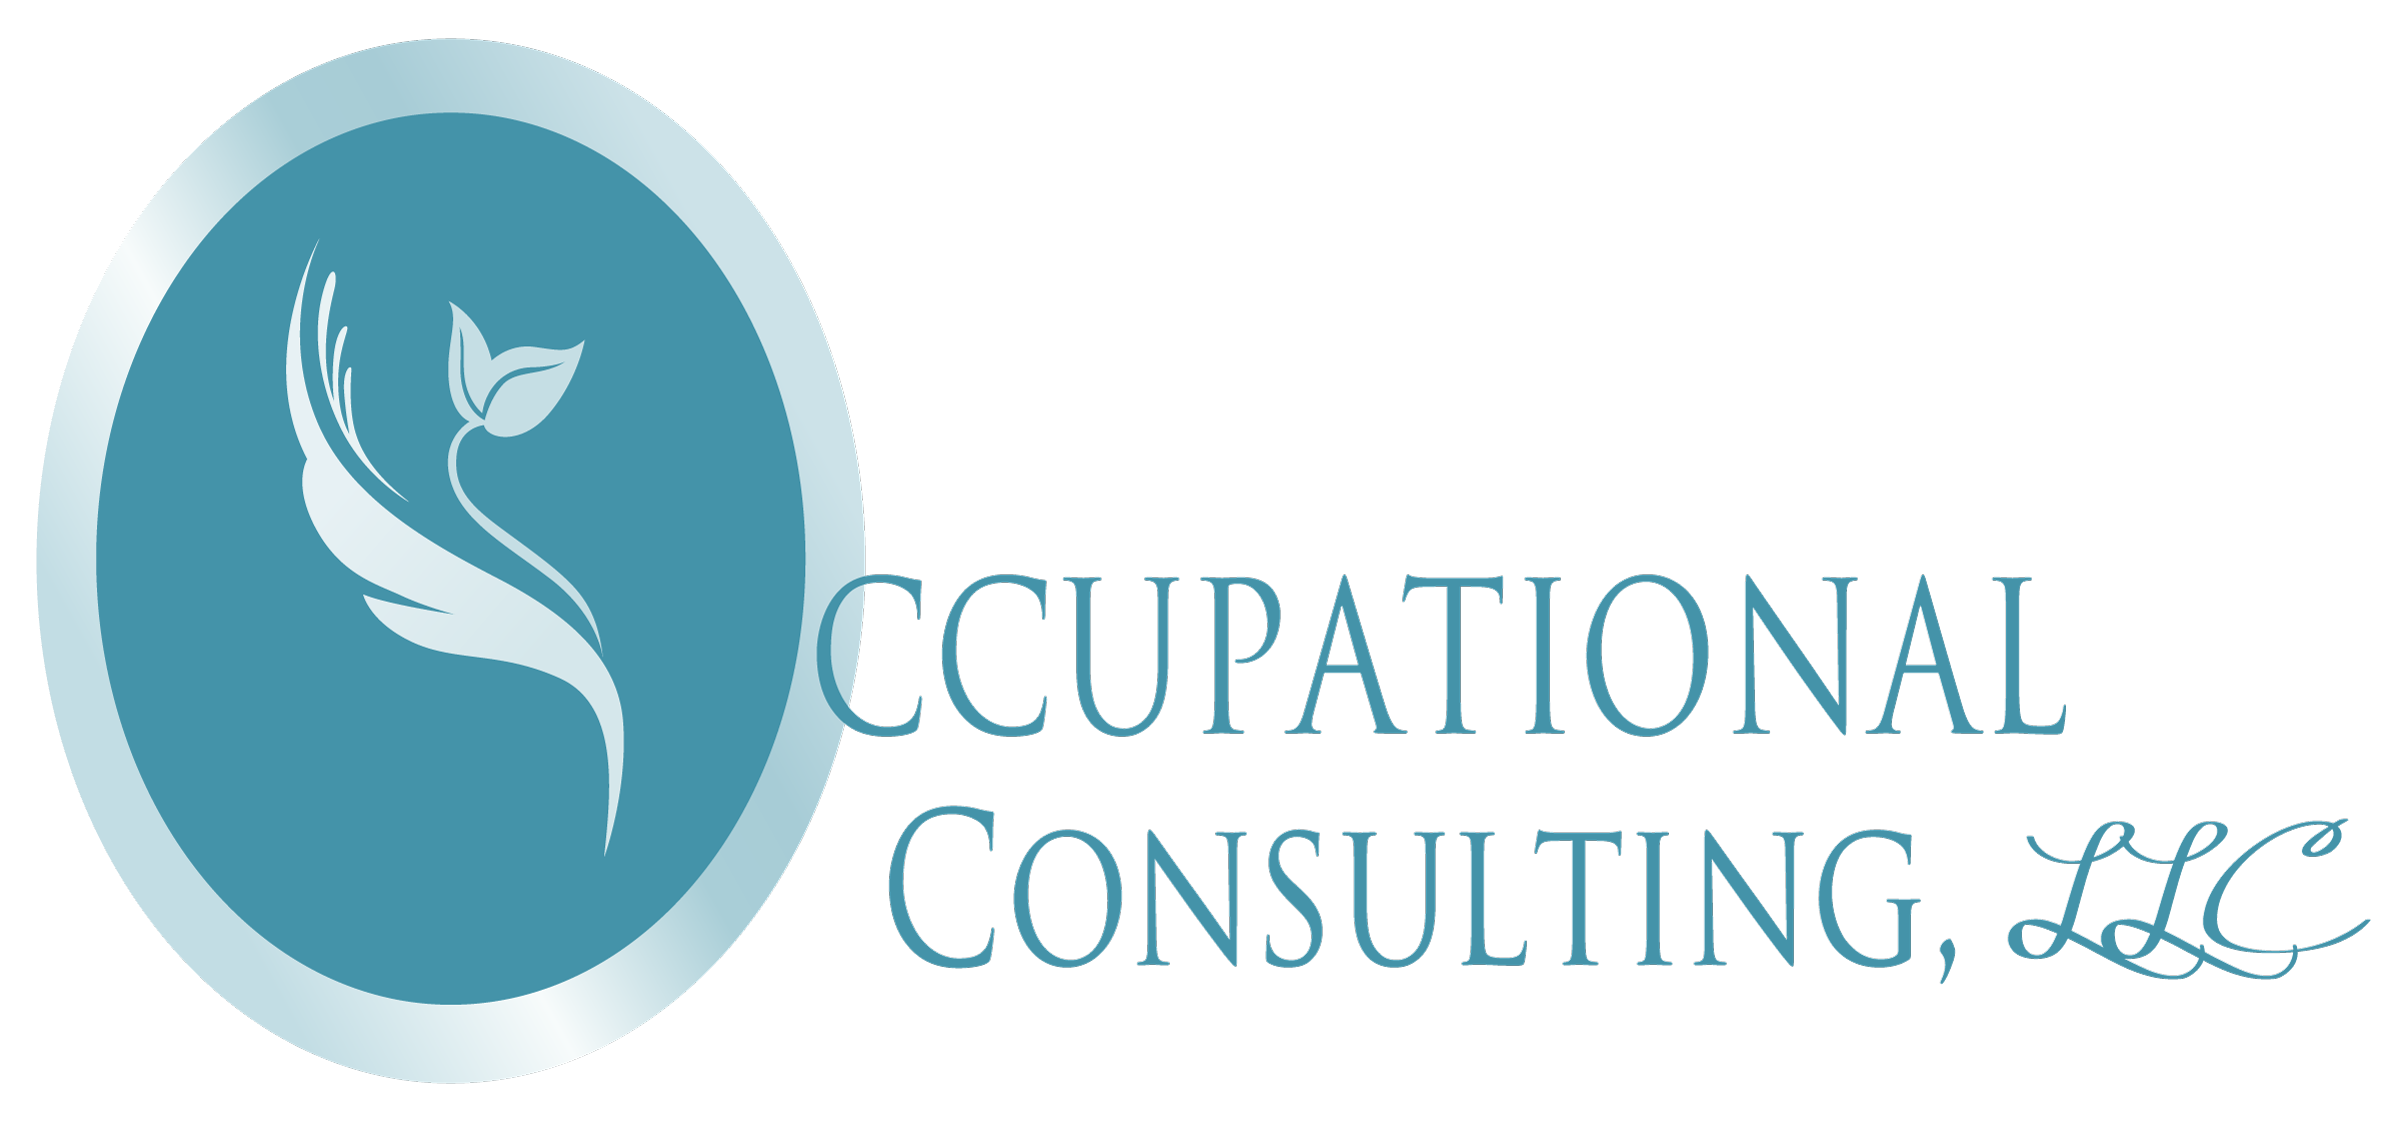 Occupational Consulting Logo